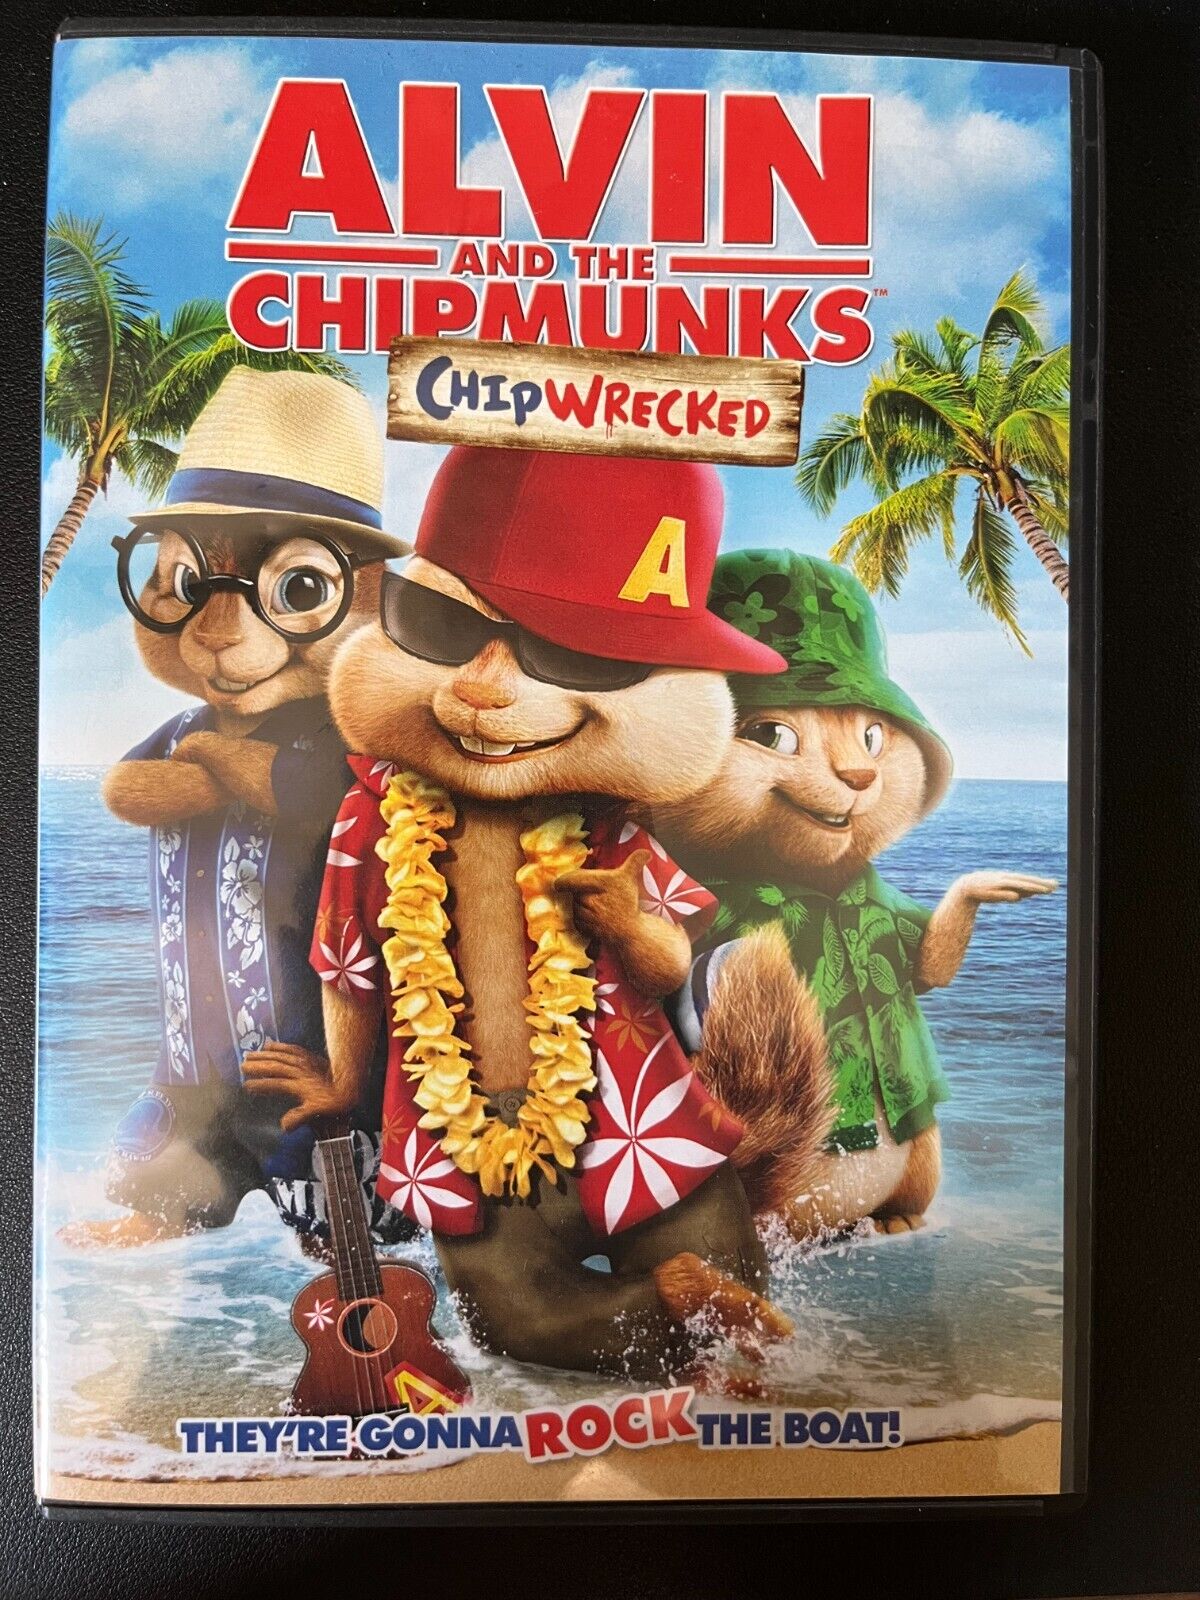 Alvin and the Chipmunks: Chipwrecked (DVD, 2011)